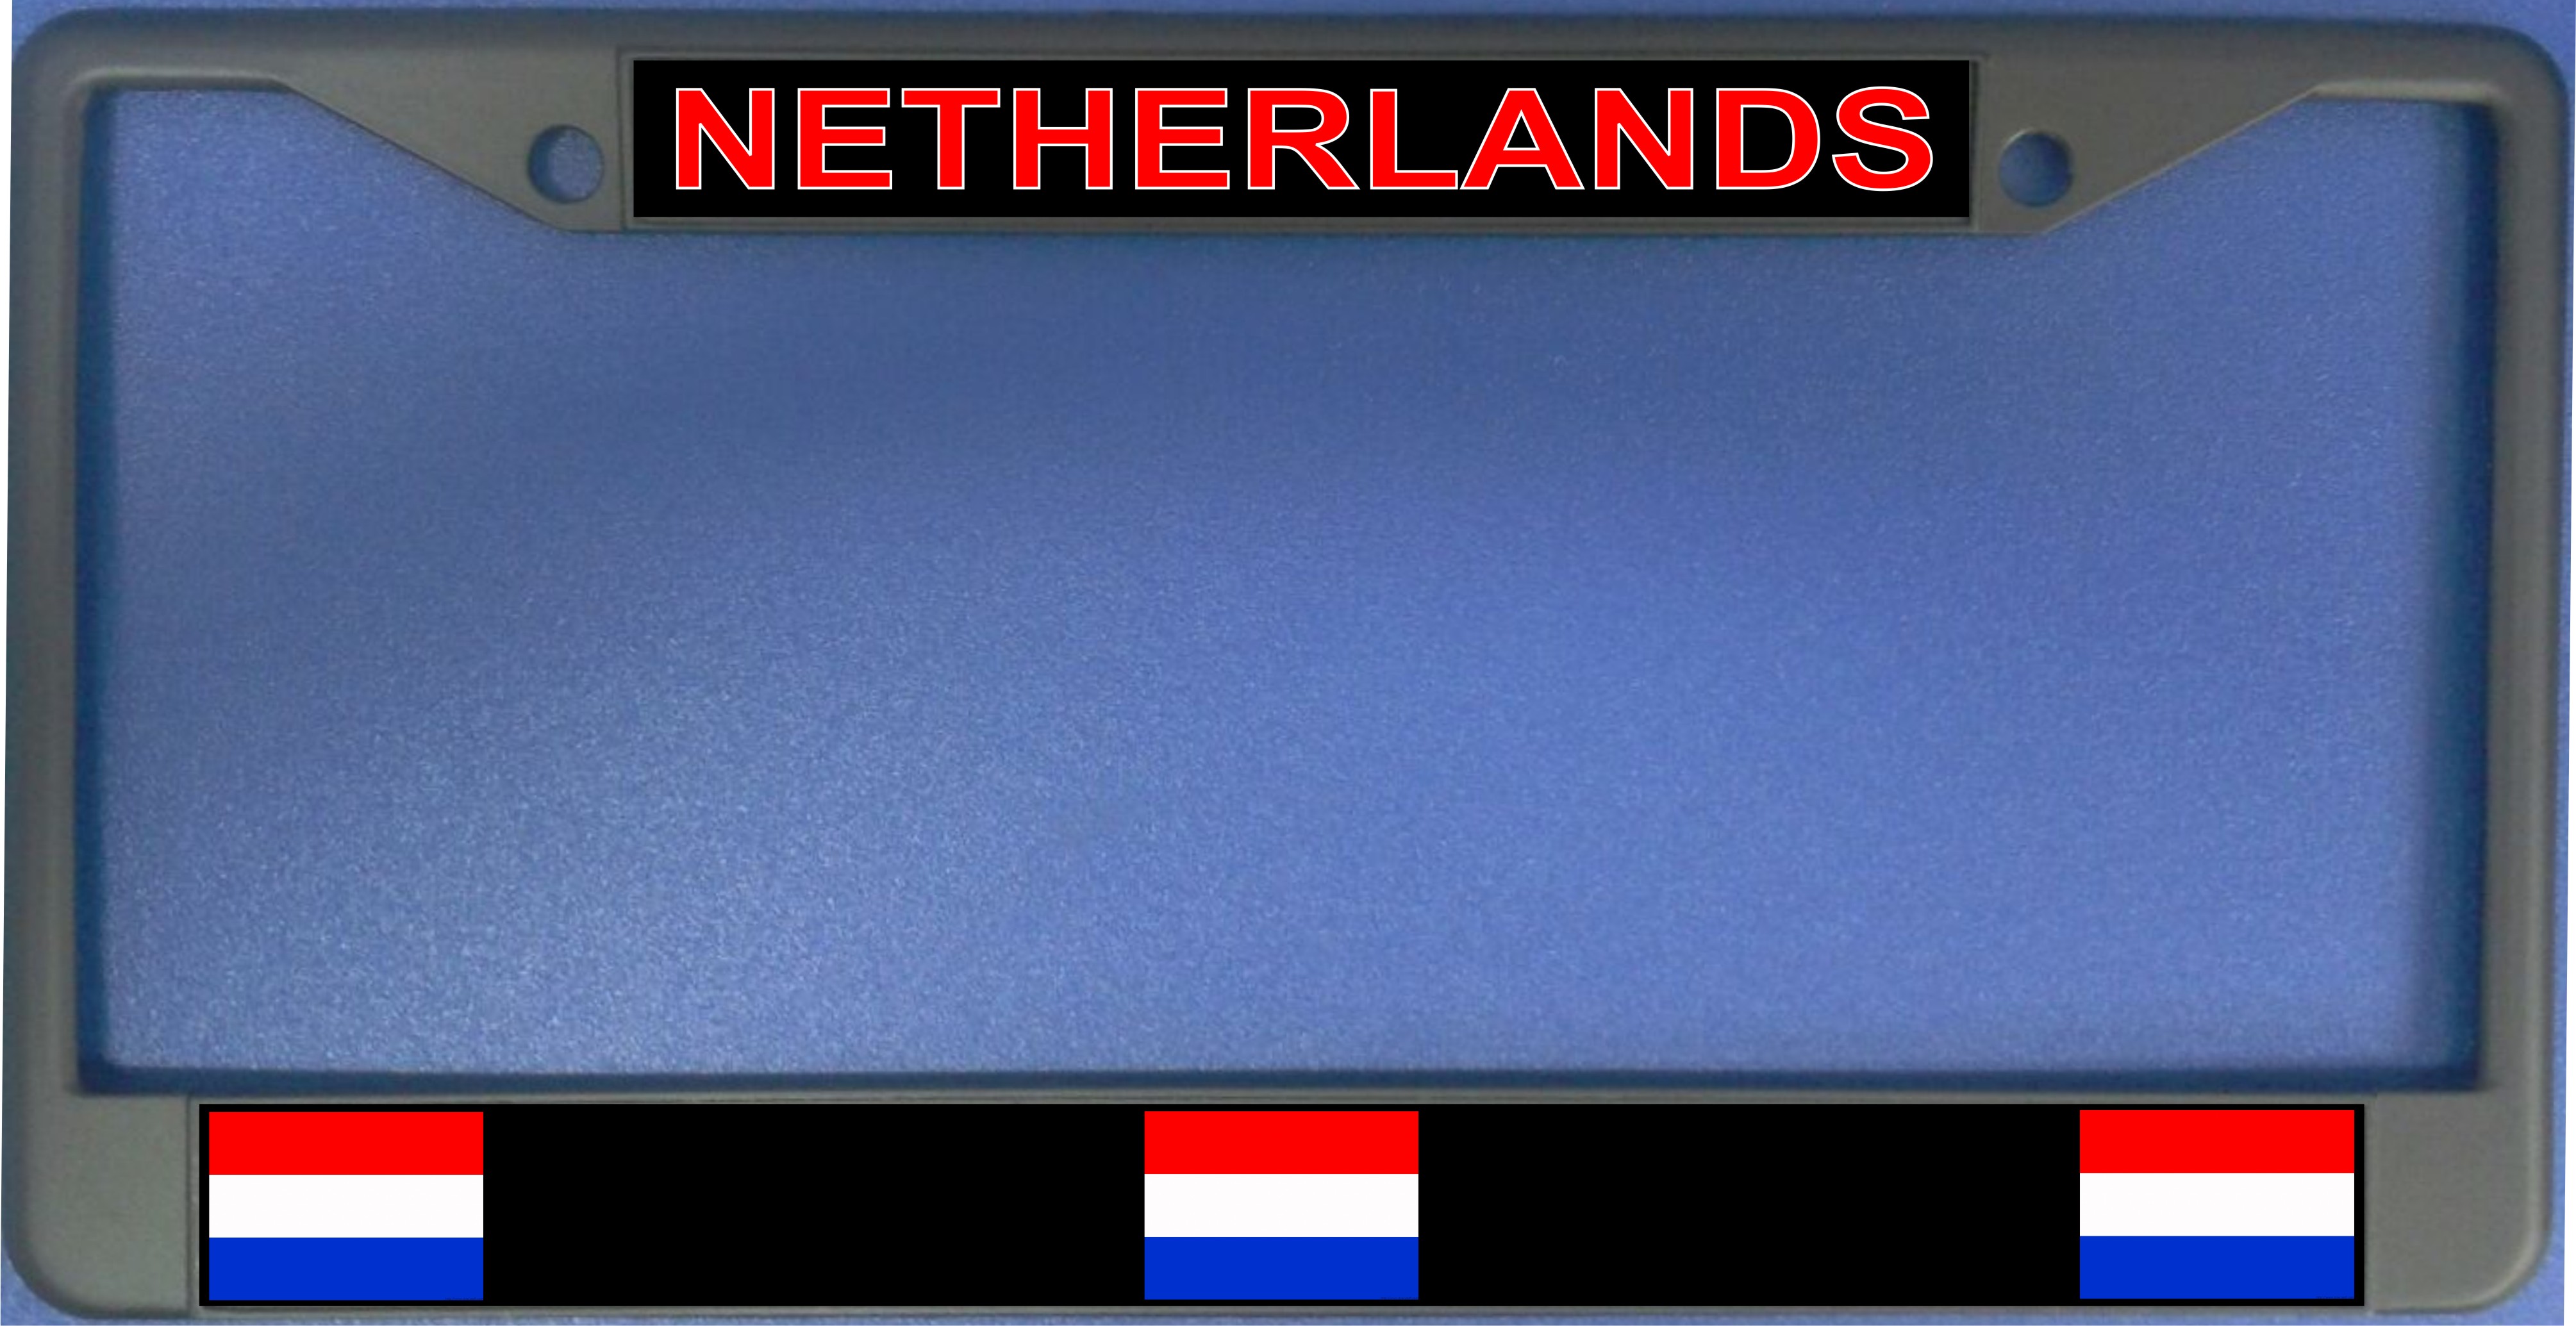 Netherlands FLAG Photo License Plate Frame  Free Screw Caps with this Frame